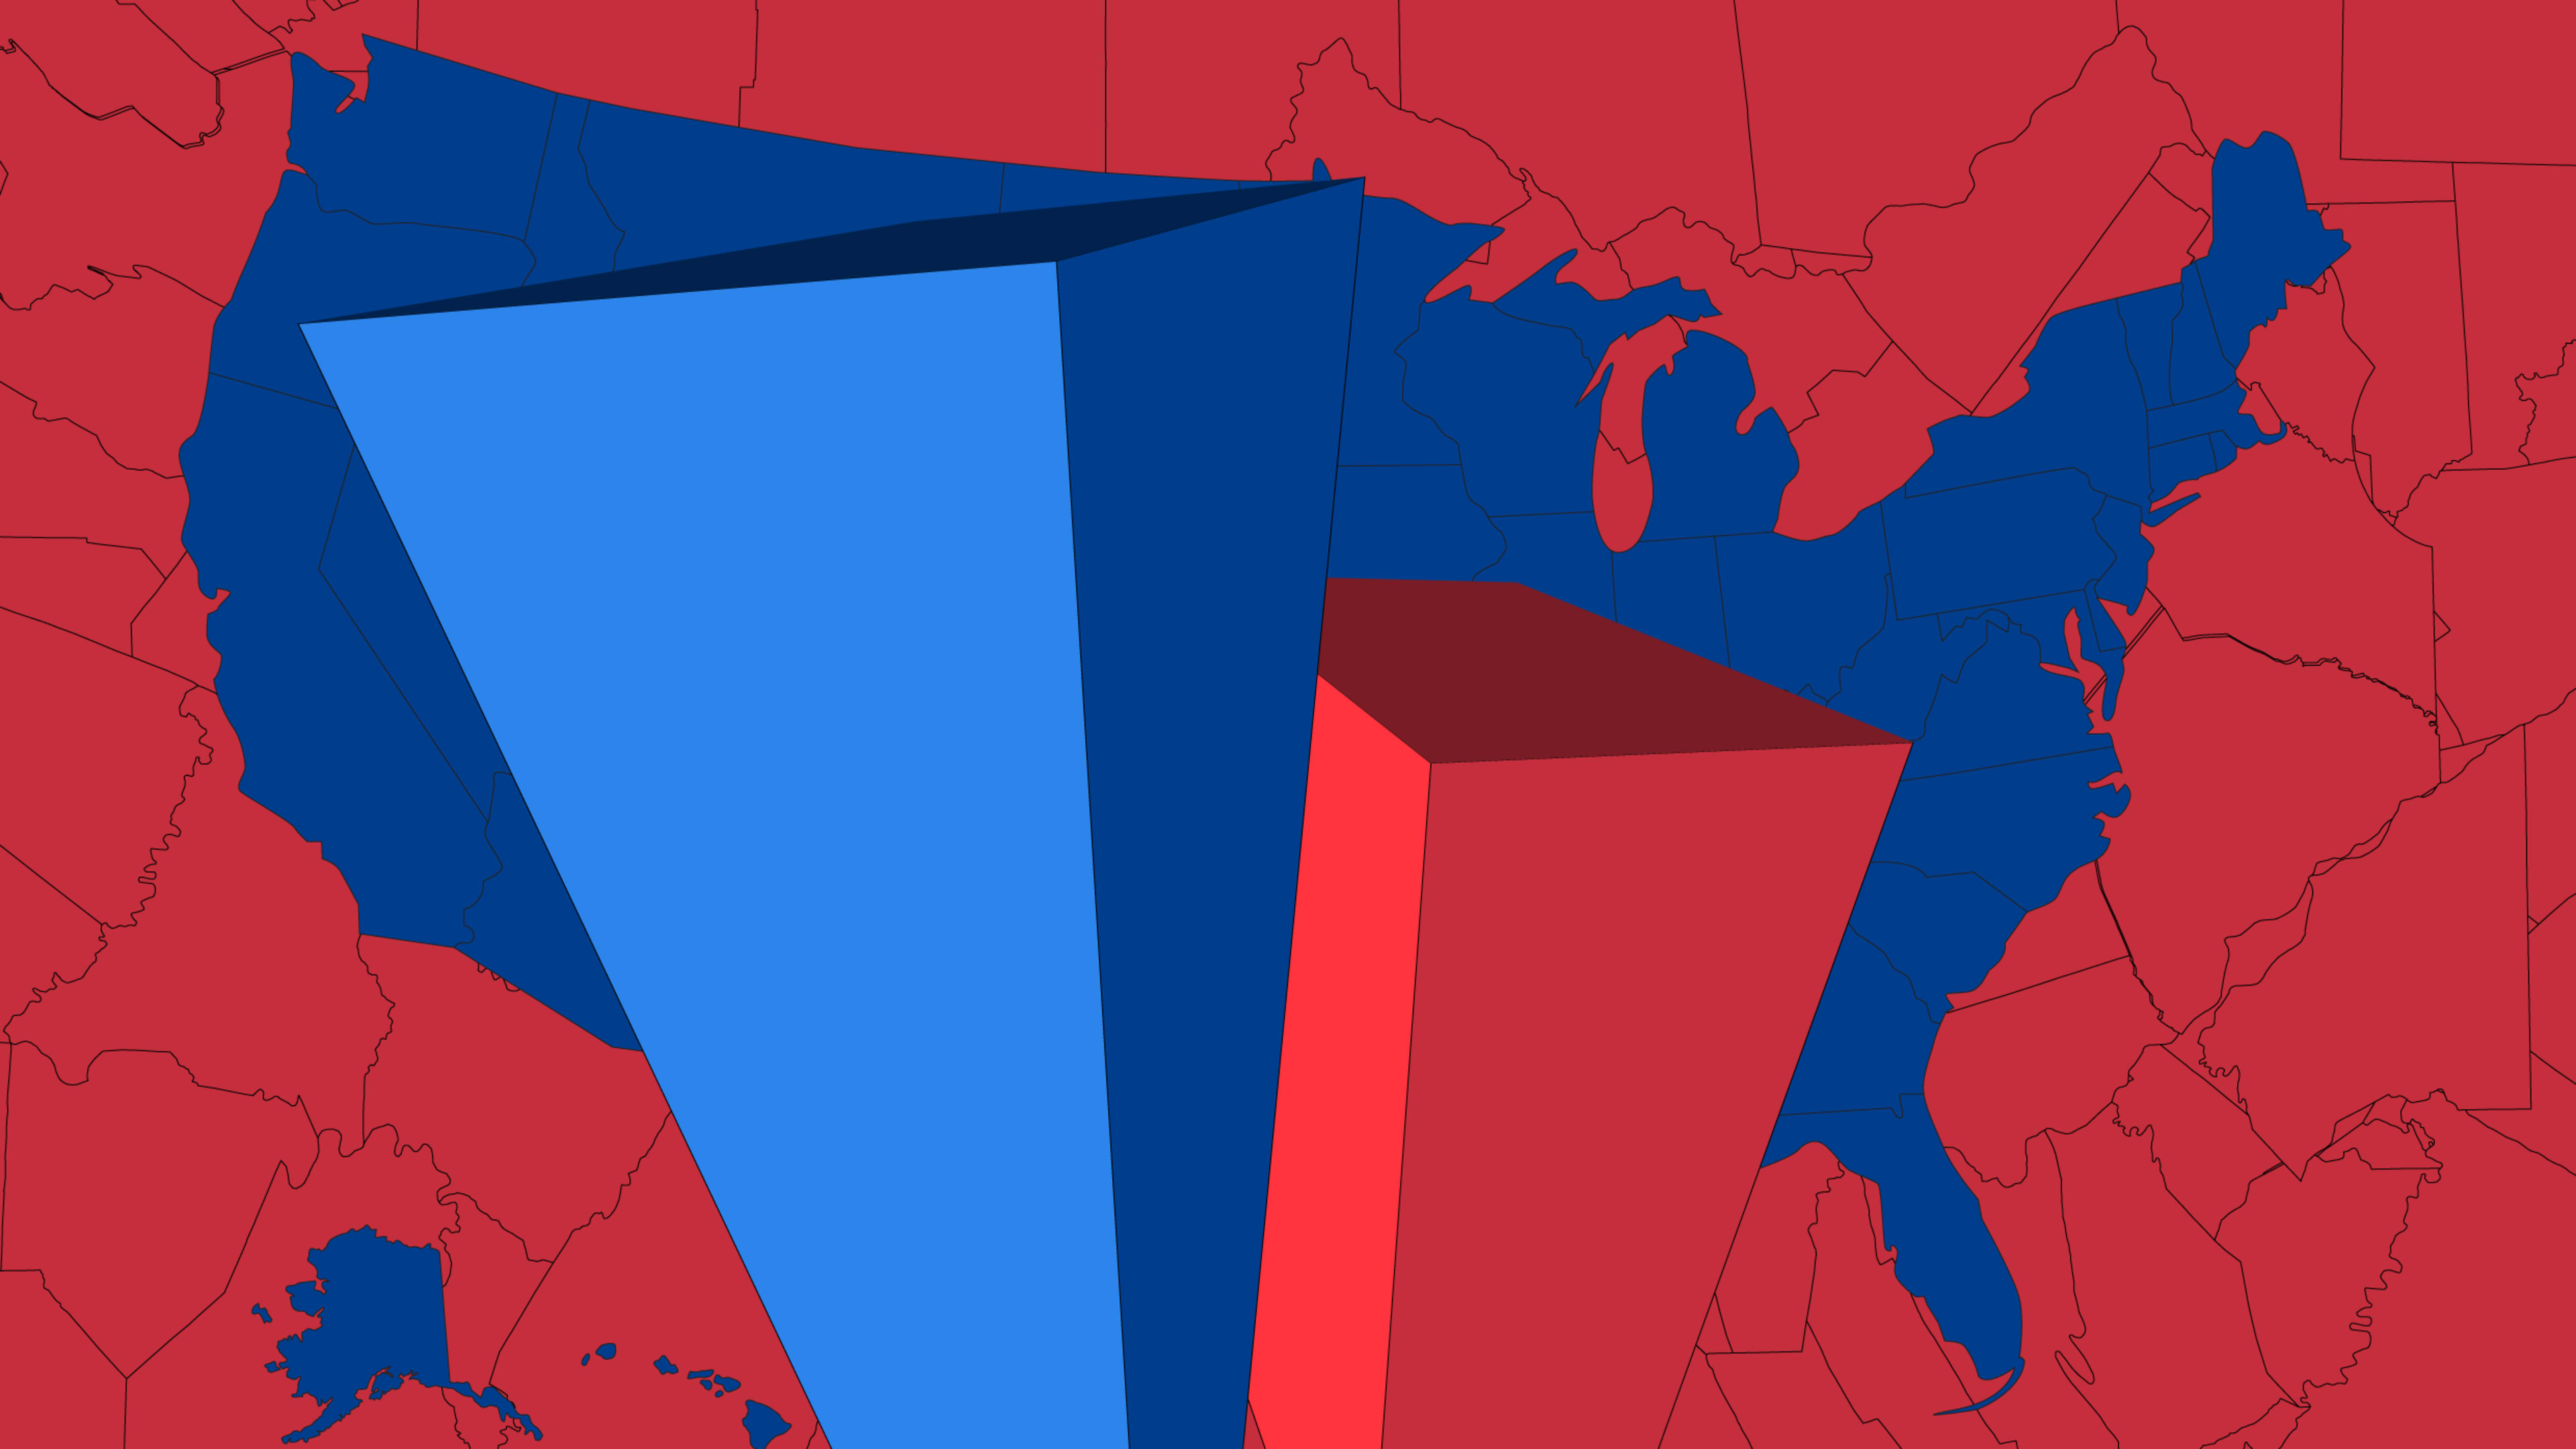 Abolish the Electoral College? We could also just work around it